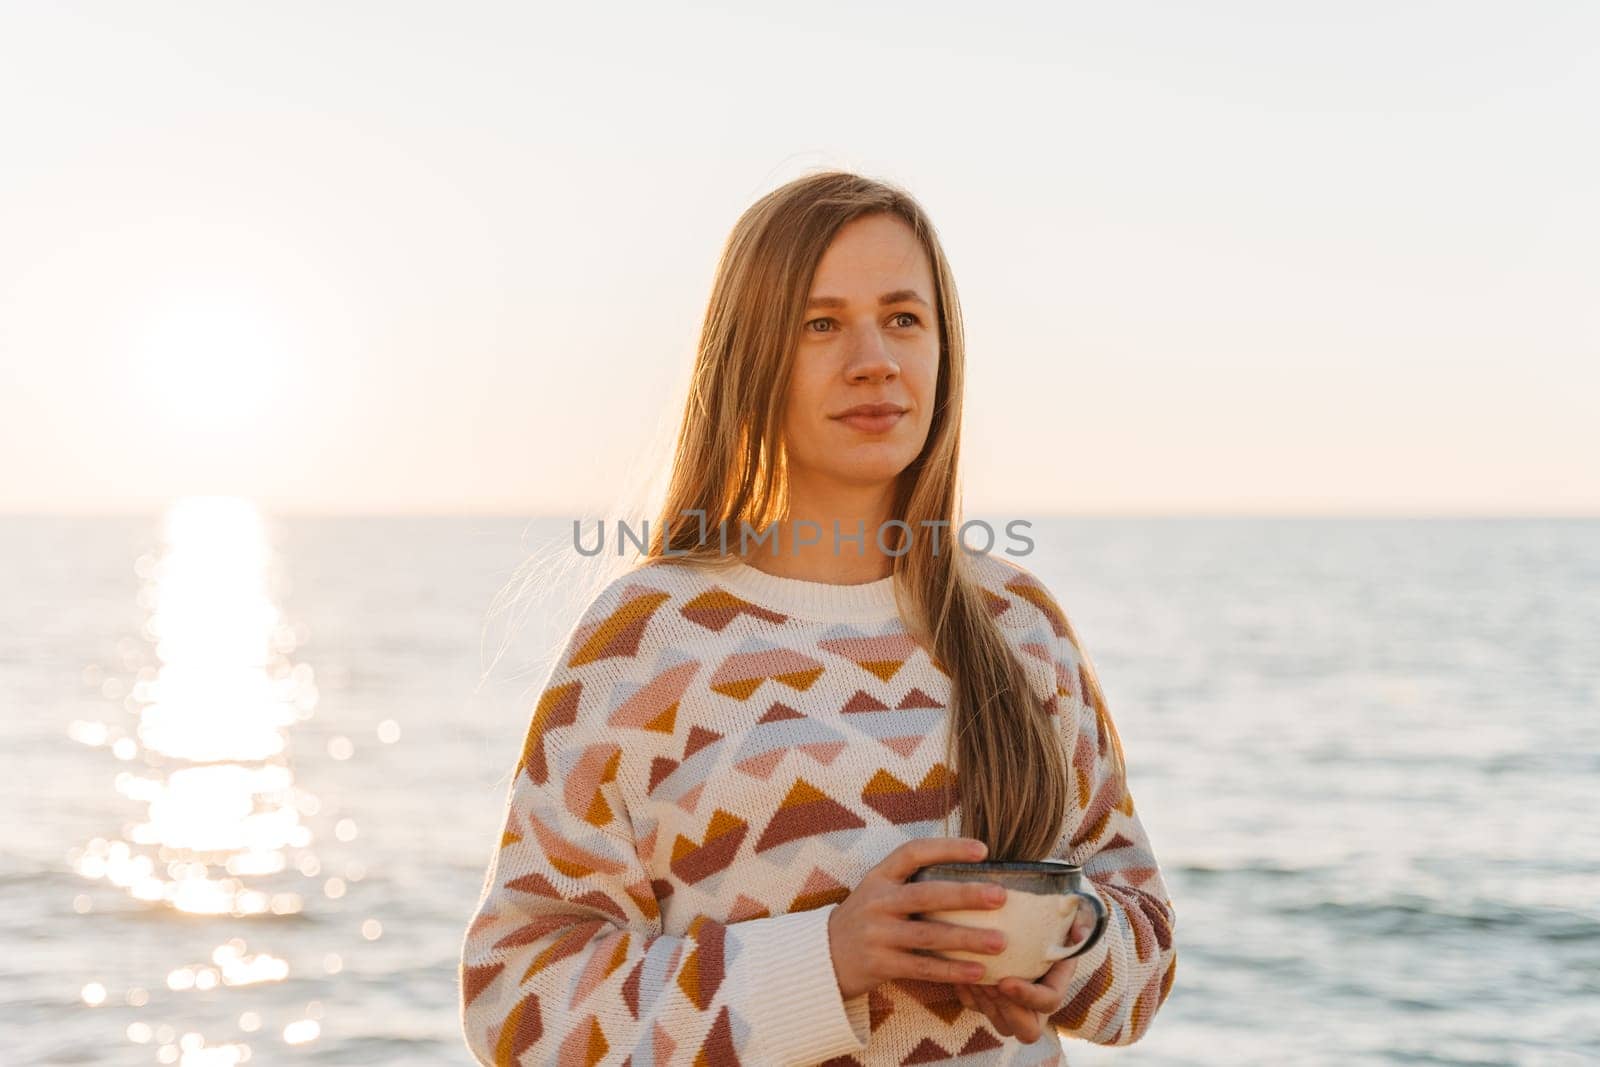 Young beautiful girl in cozy sweater holding coffee cup while enjoying winter sun on seaside shore during mild sunset. Cute attractive woman enjoying cup of tea with autumn ocean sun trail background.